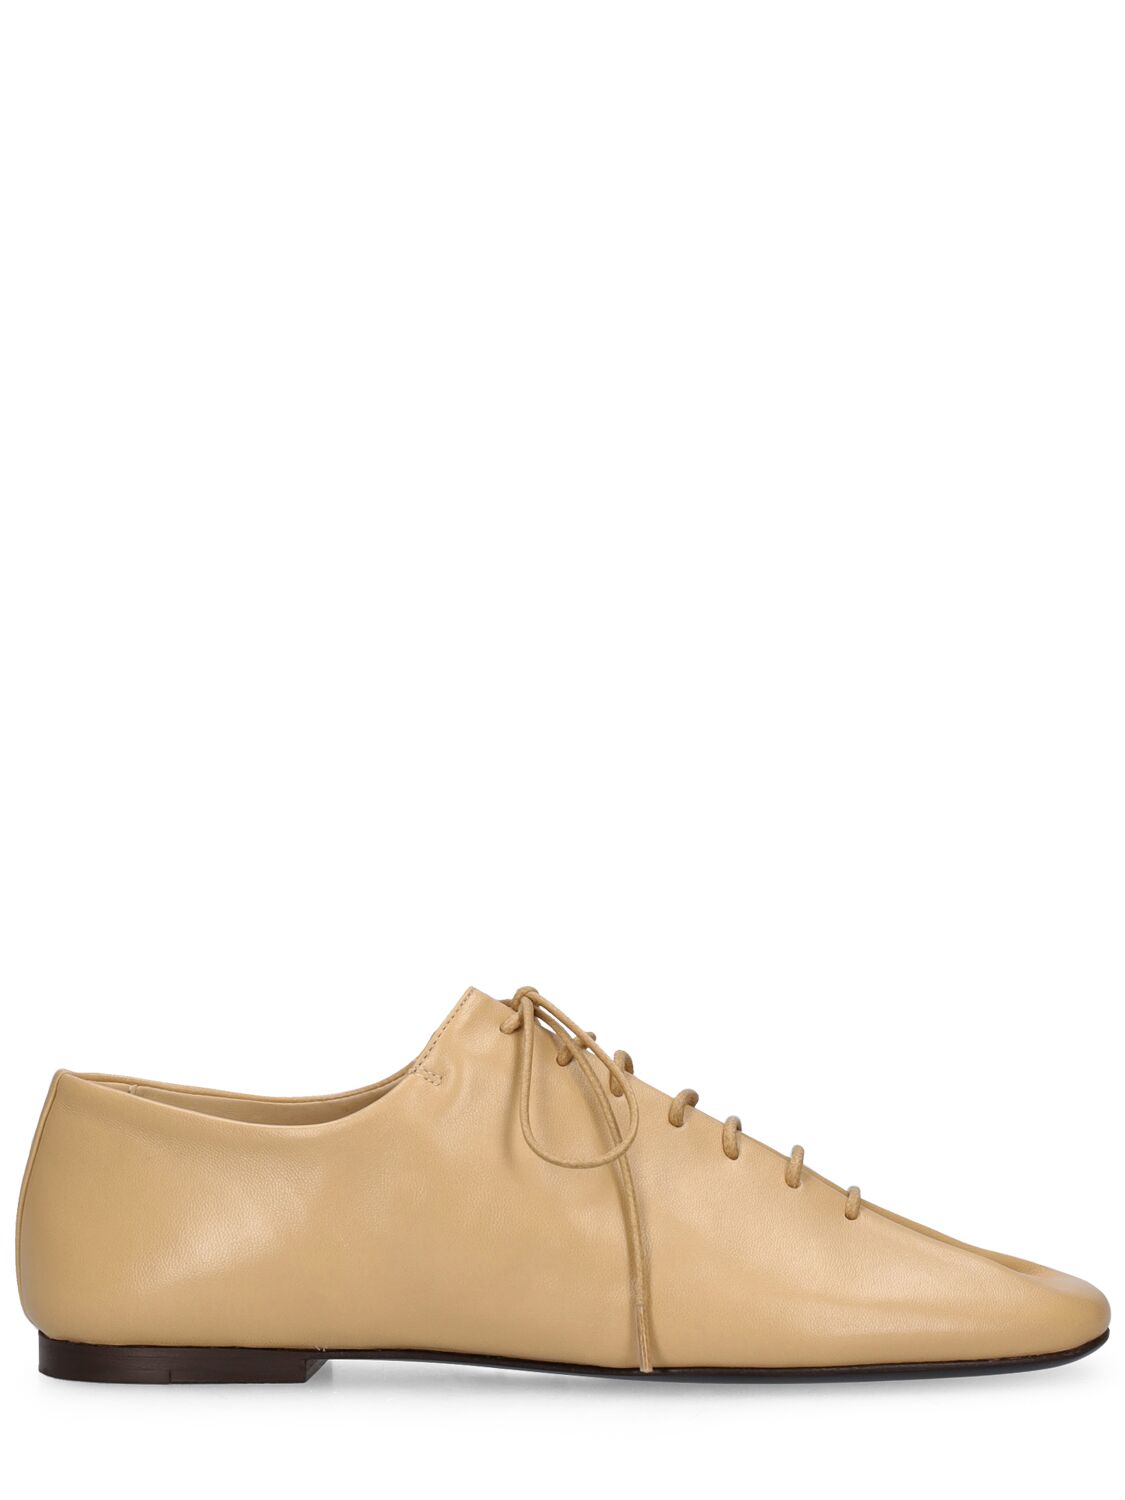 Lemaire 10mm Souris Leather Lace-up Shoes In Seashell Beige